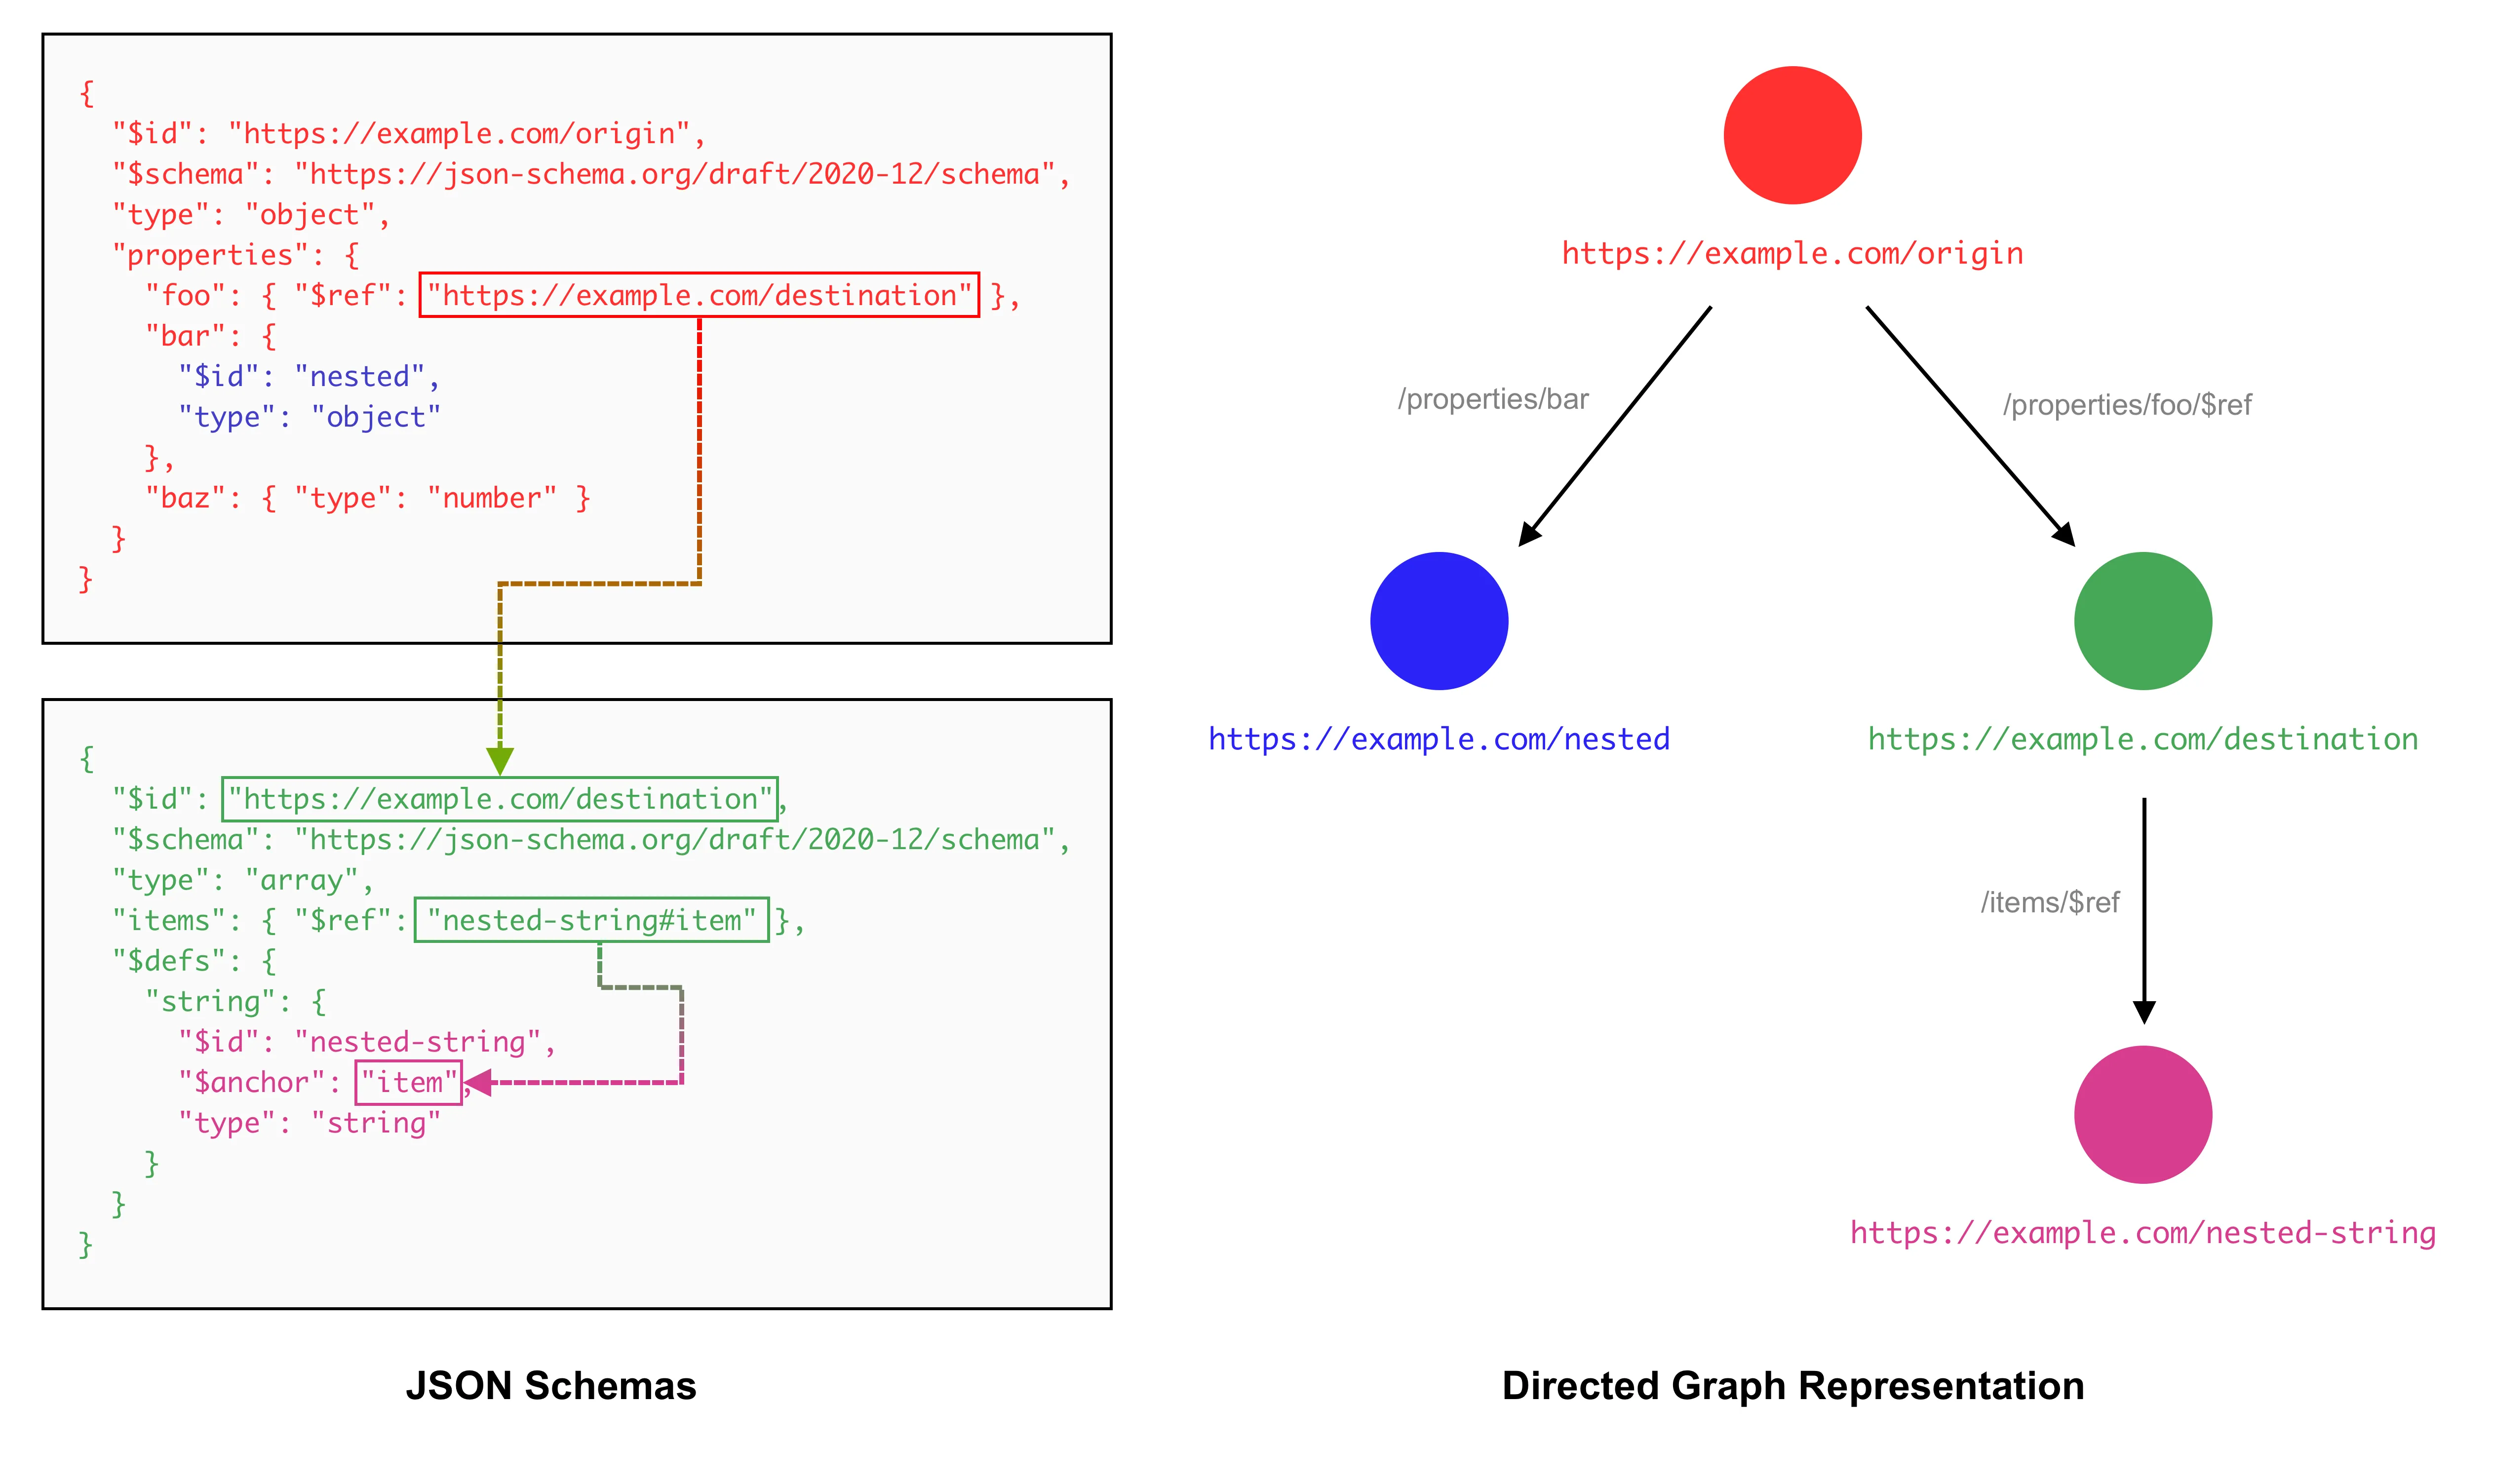 Thinking of a JSON Schema as a directed graph